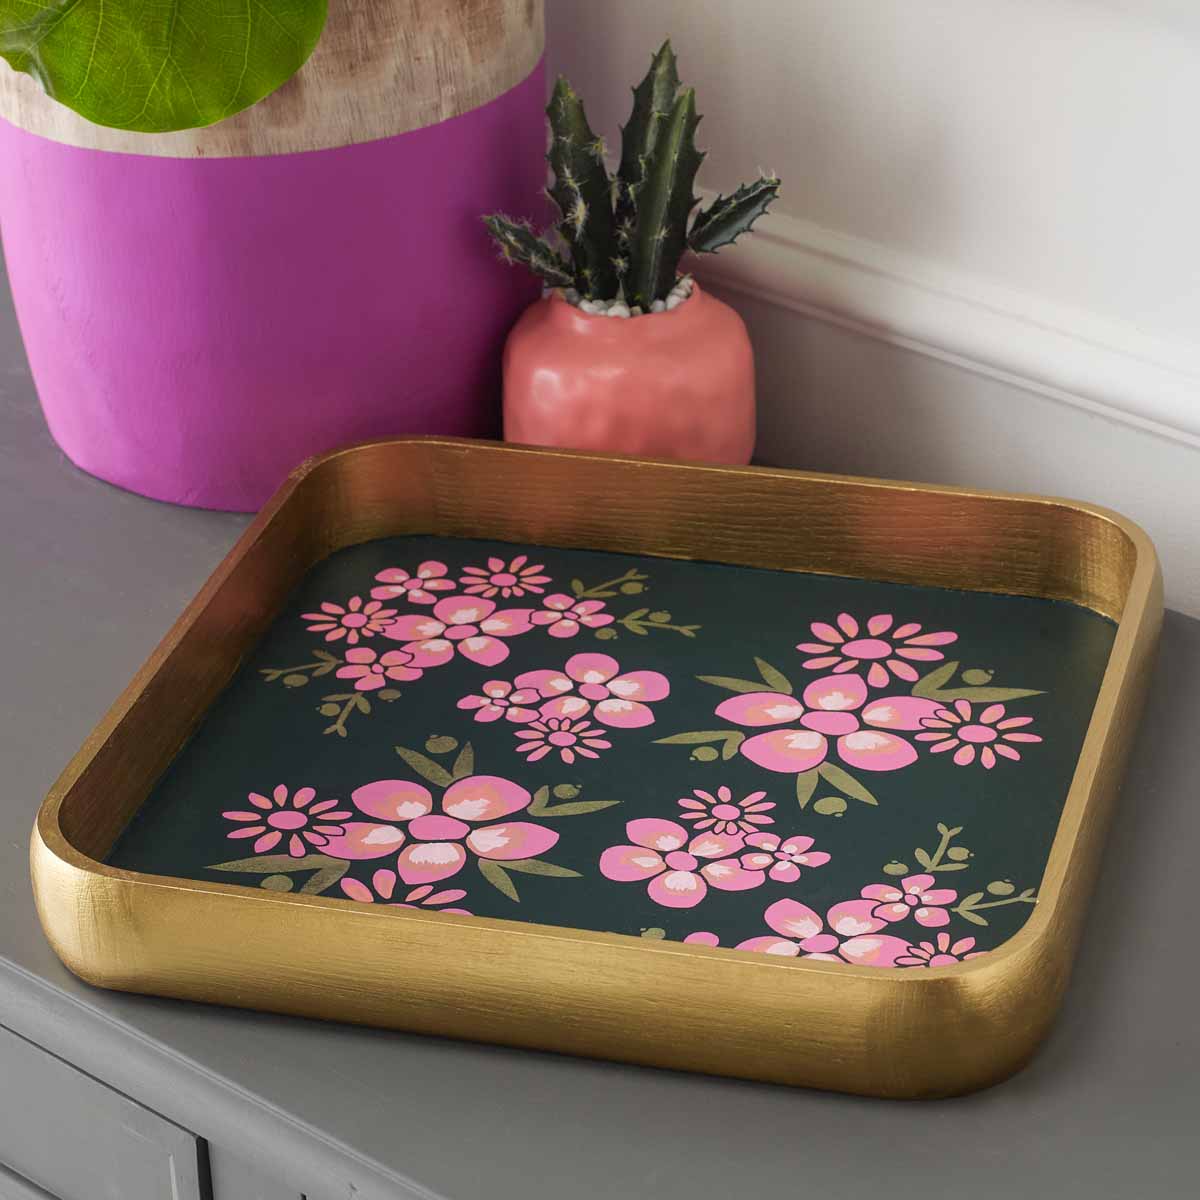 Floral Inspired Serving Tray and Vases